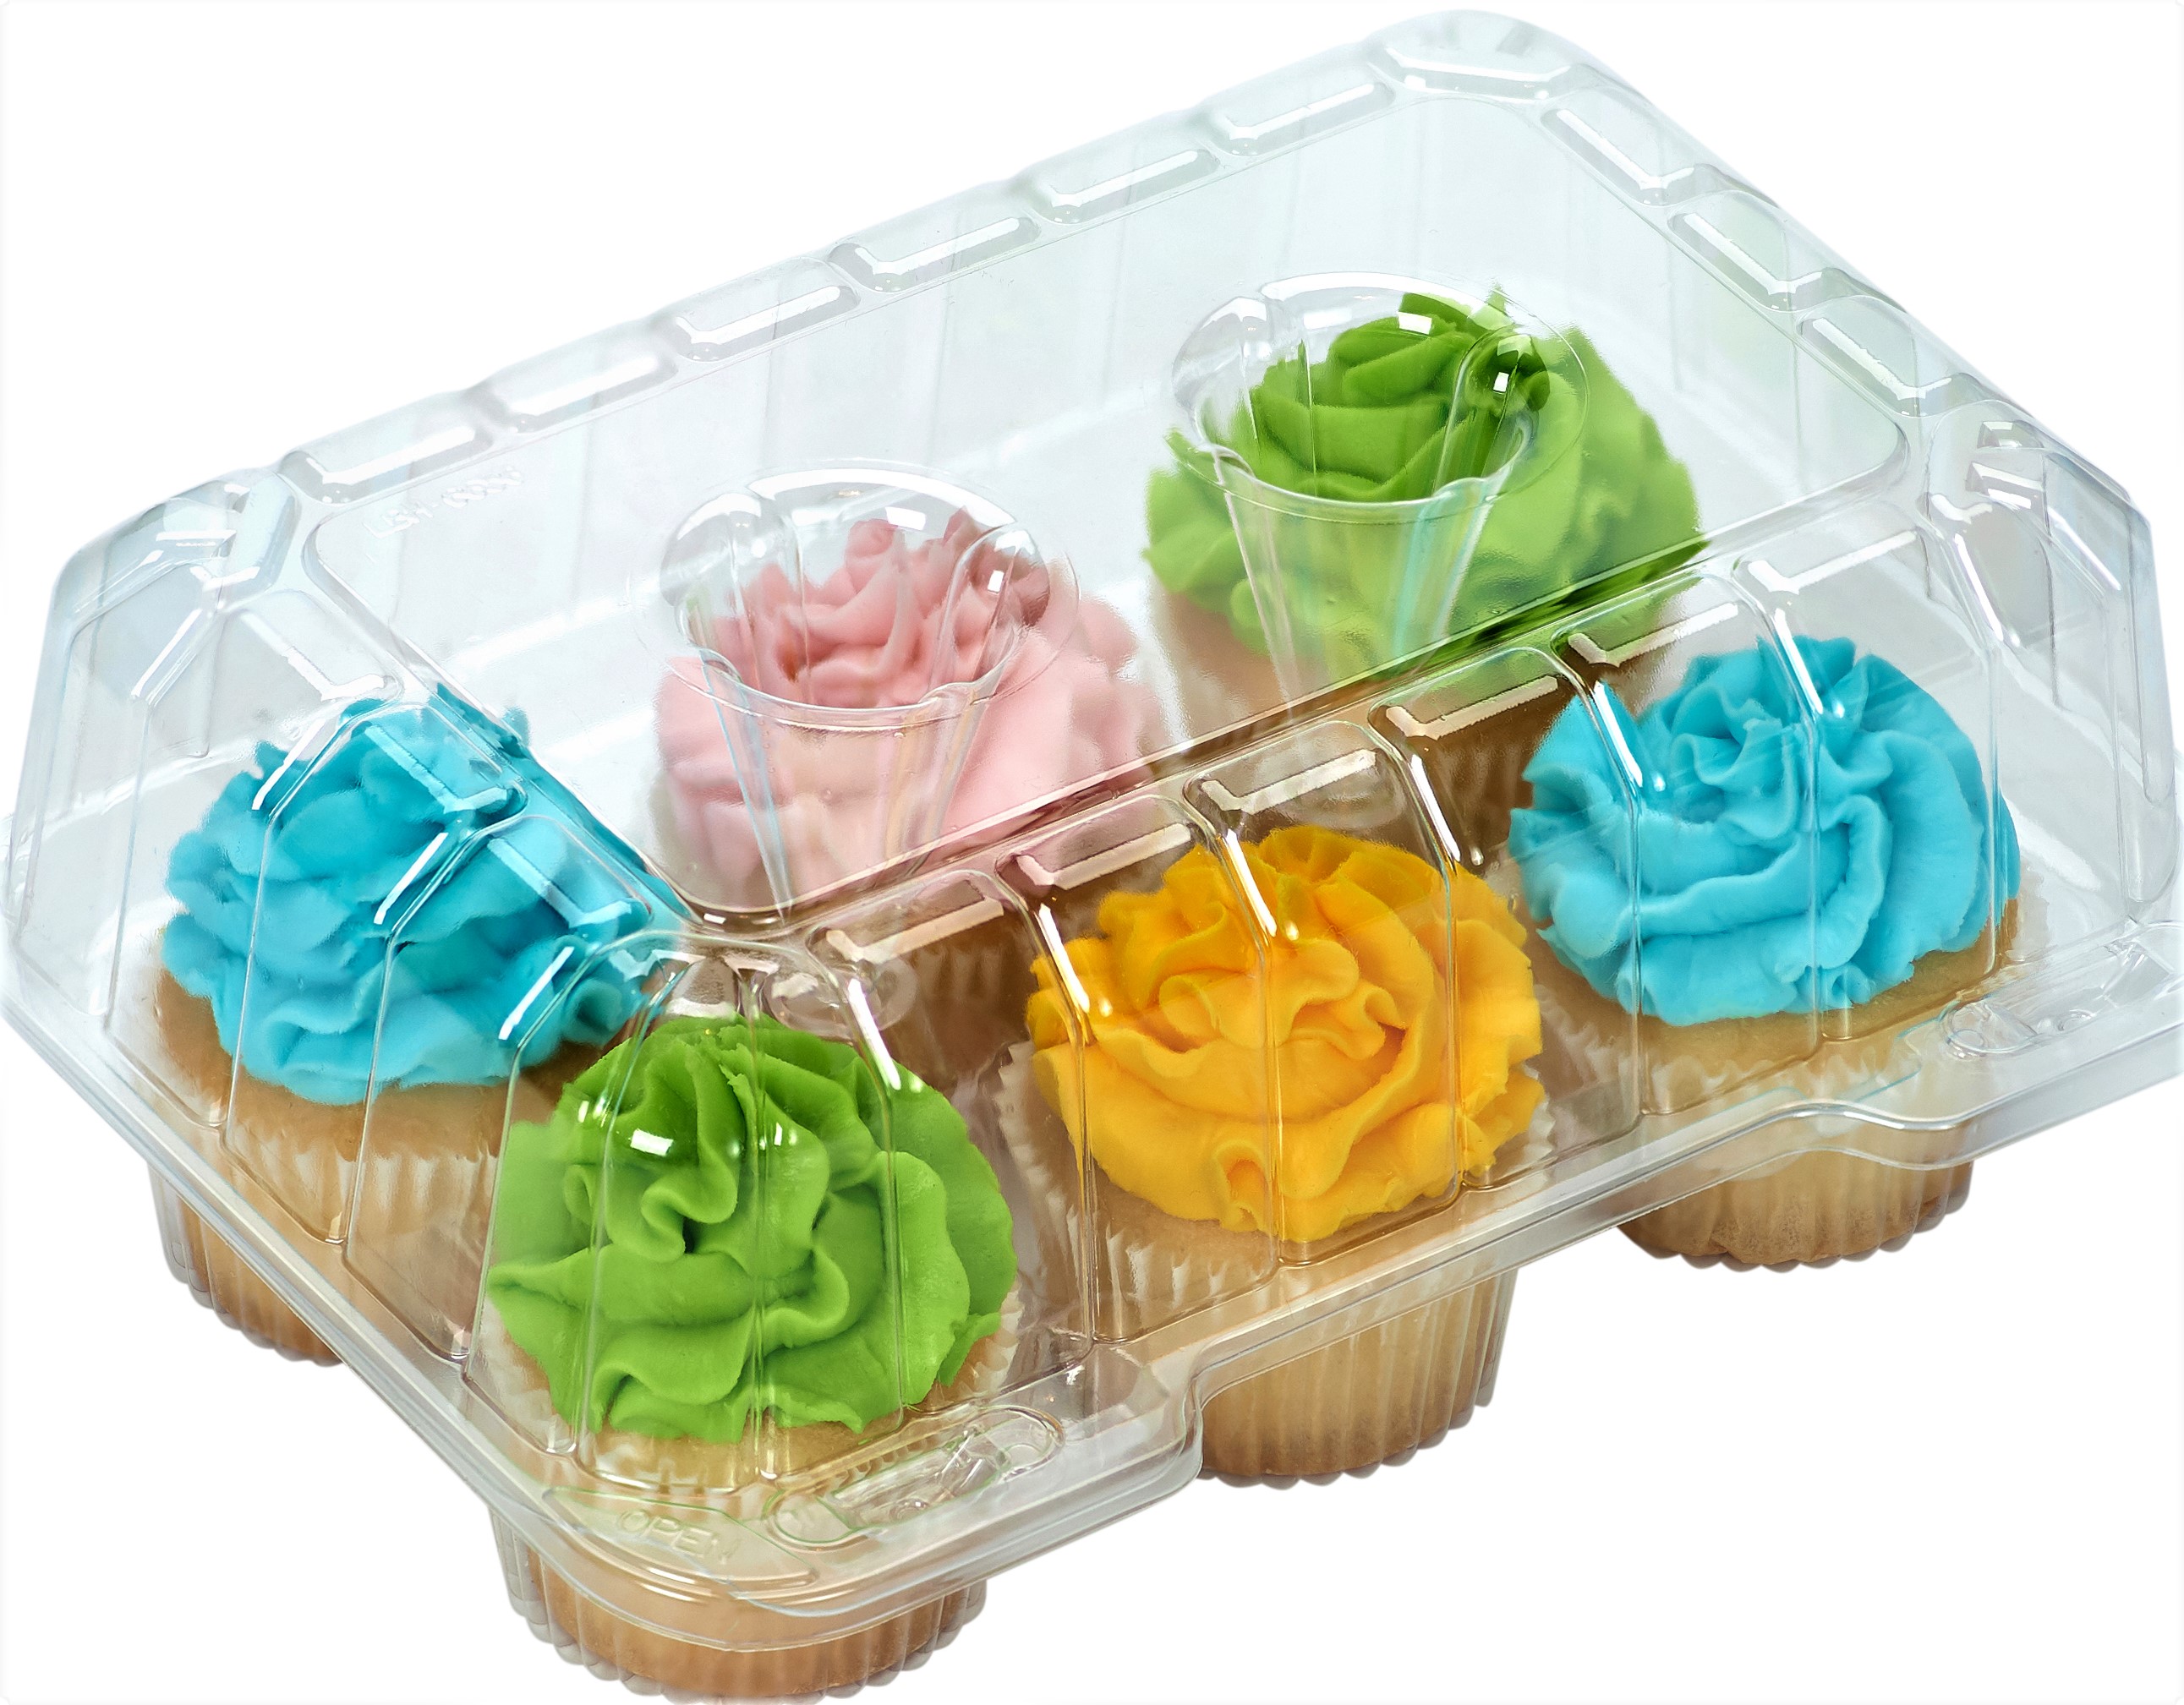 12-pack-4-height-clear-cupcake-boxes-4-high-for-high-toppinges-holds-6-cupcakes-each-12